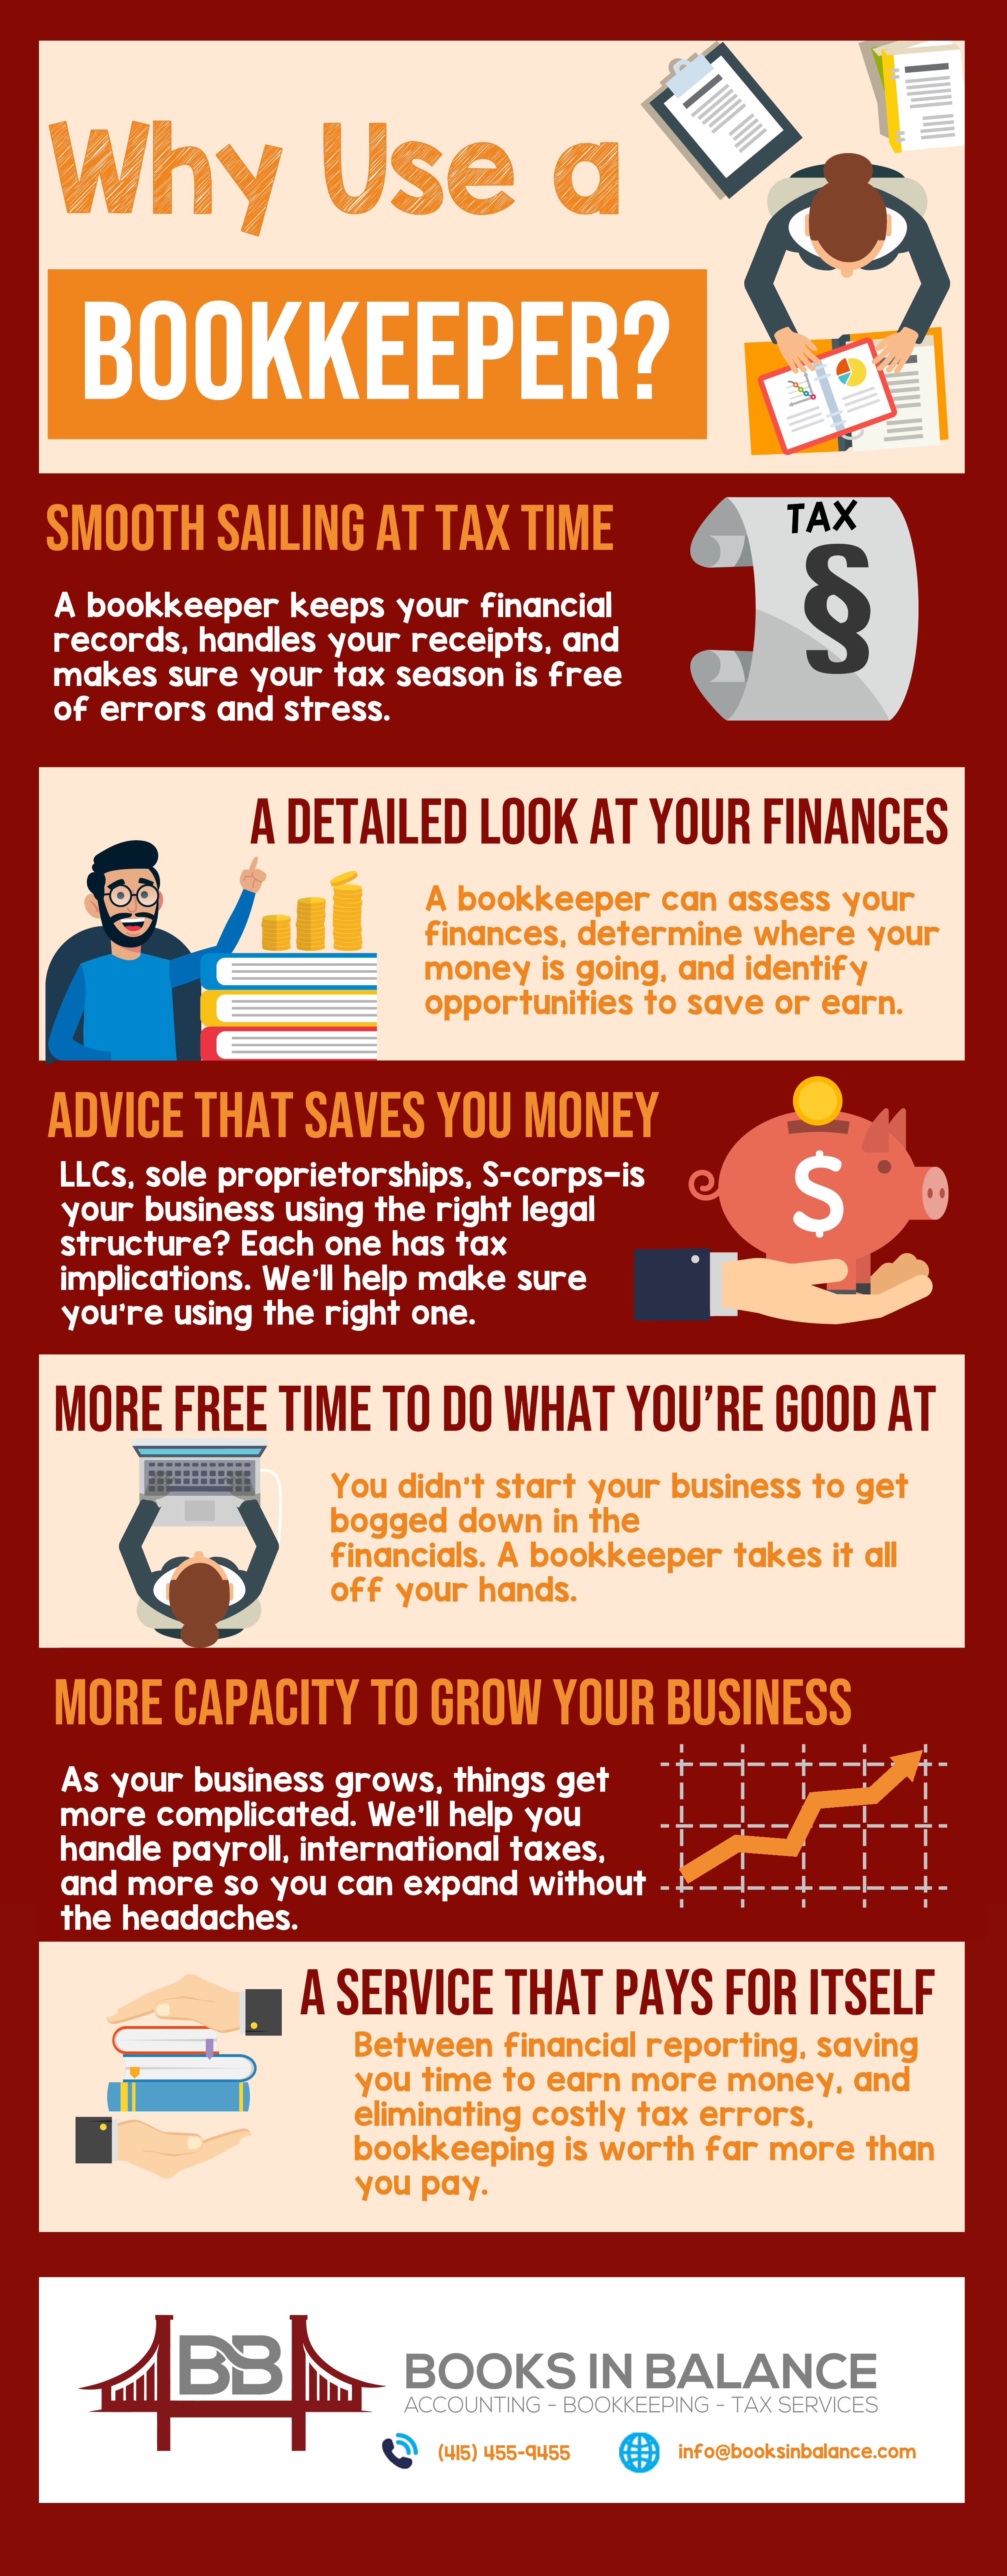 infographic-books-in-balance-why-use-a-bookkeeper